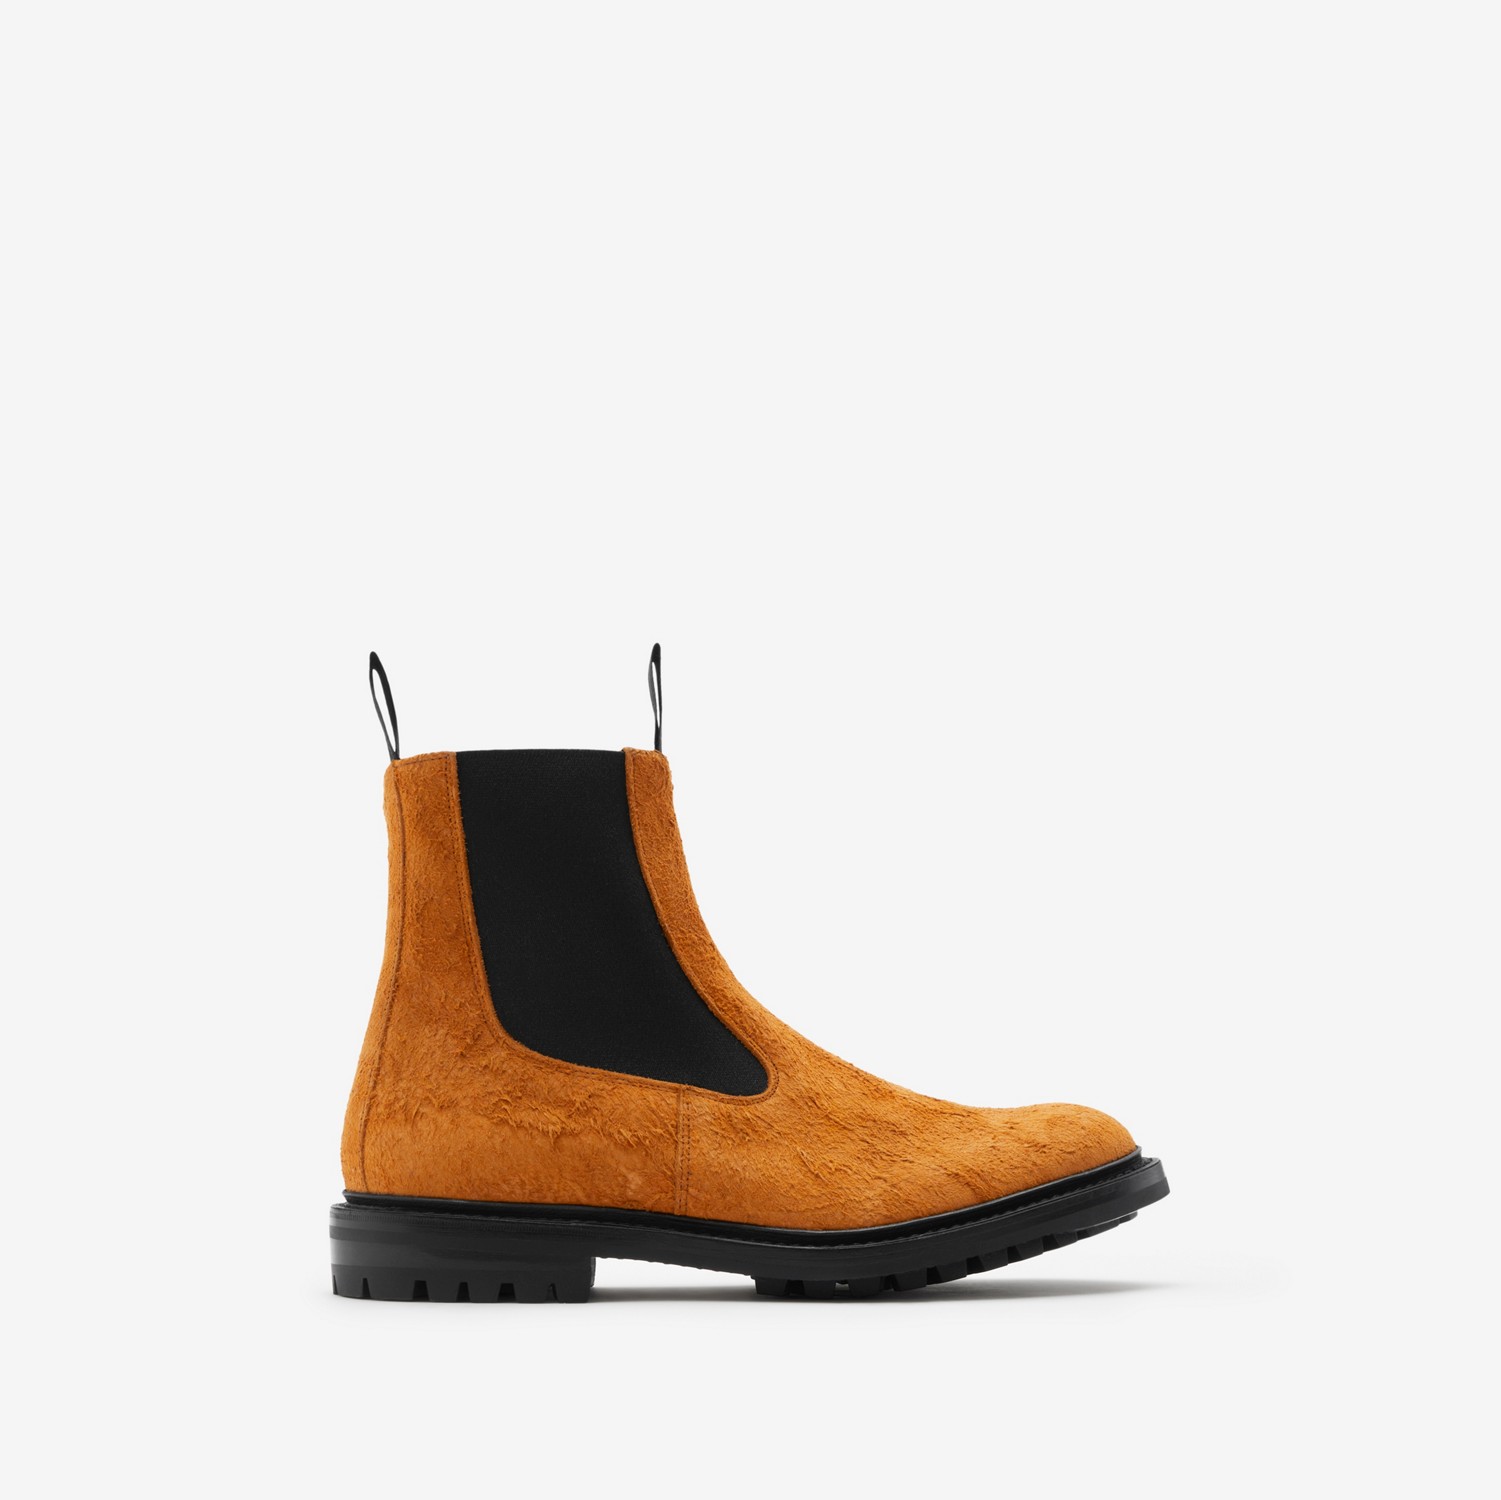 Tricker’s Suede Dee High Chelsea Boots in Warm Caramel | Burberry® Official